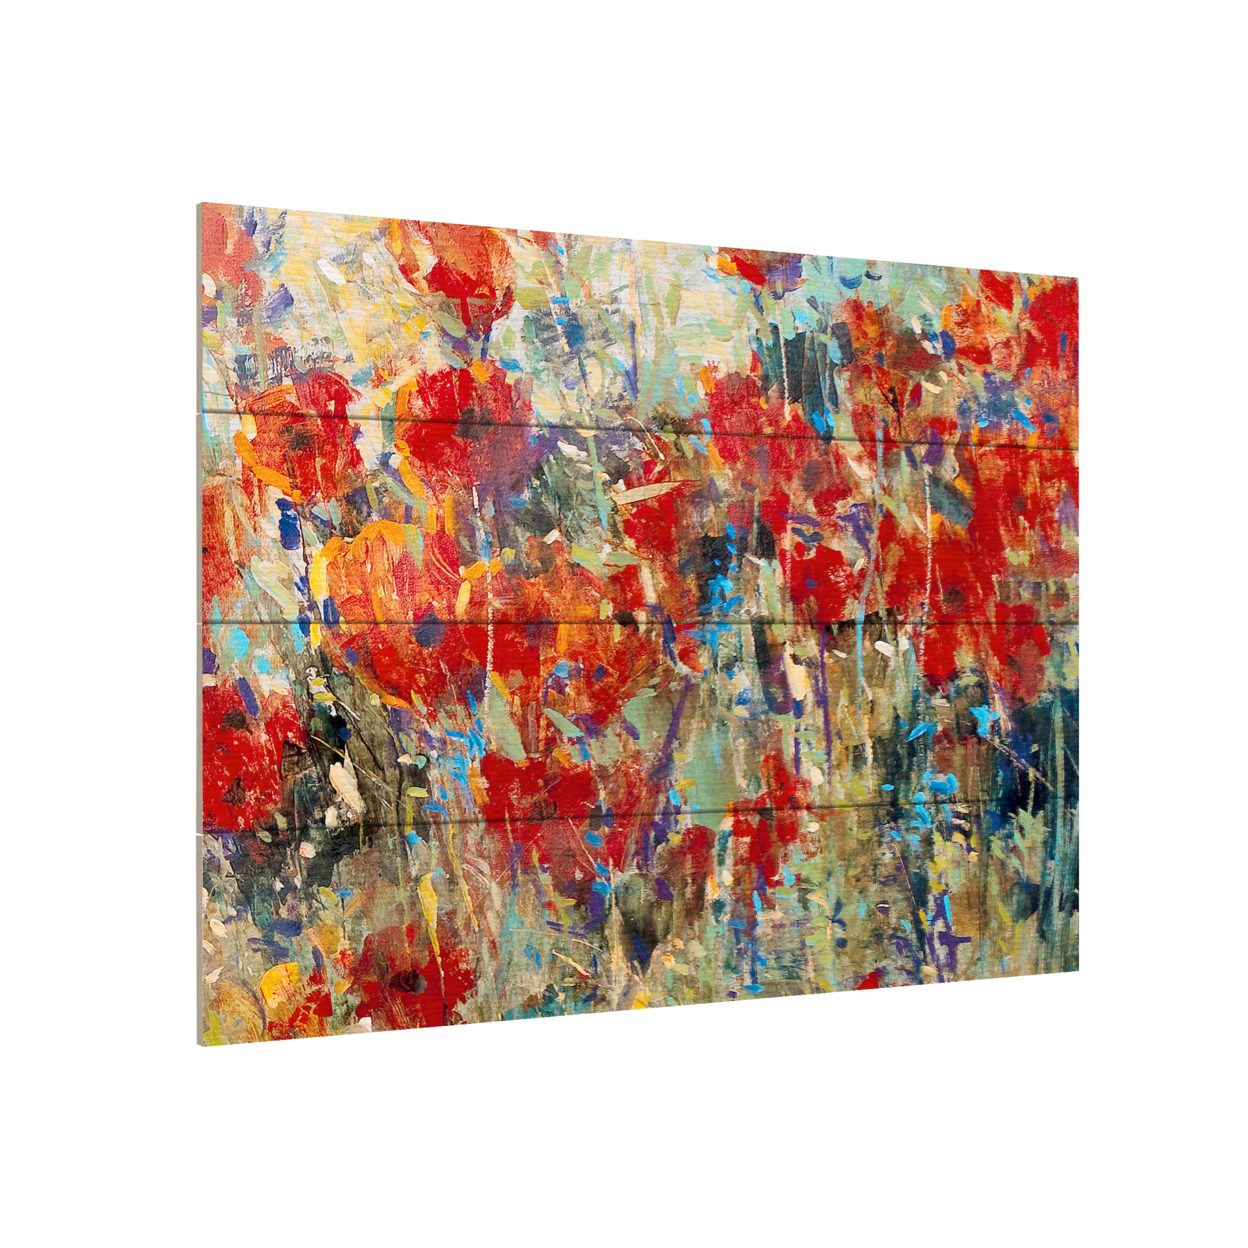 Wall Art 12 X 16 Inches Titled Red Poppy Field Ii Ready To Hang Printed On Wooden Planks